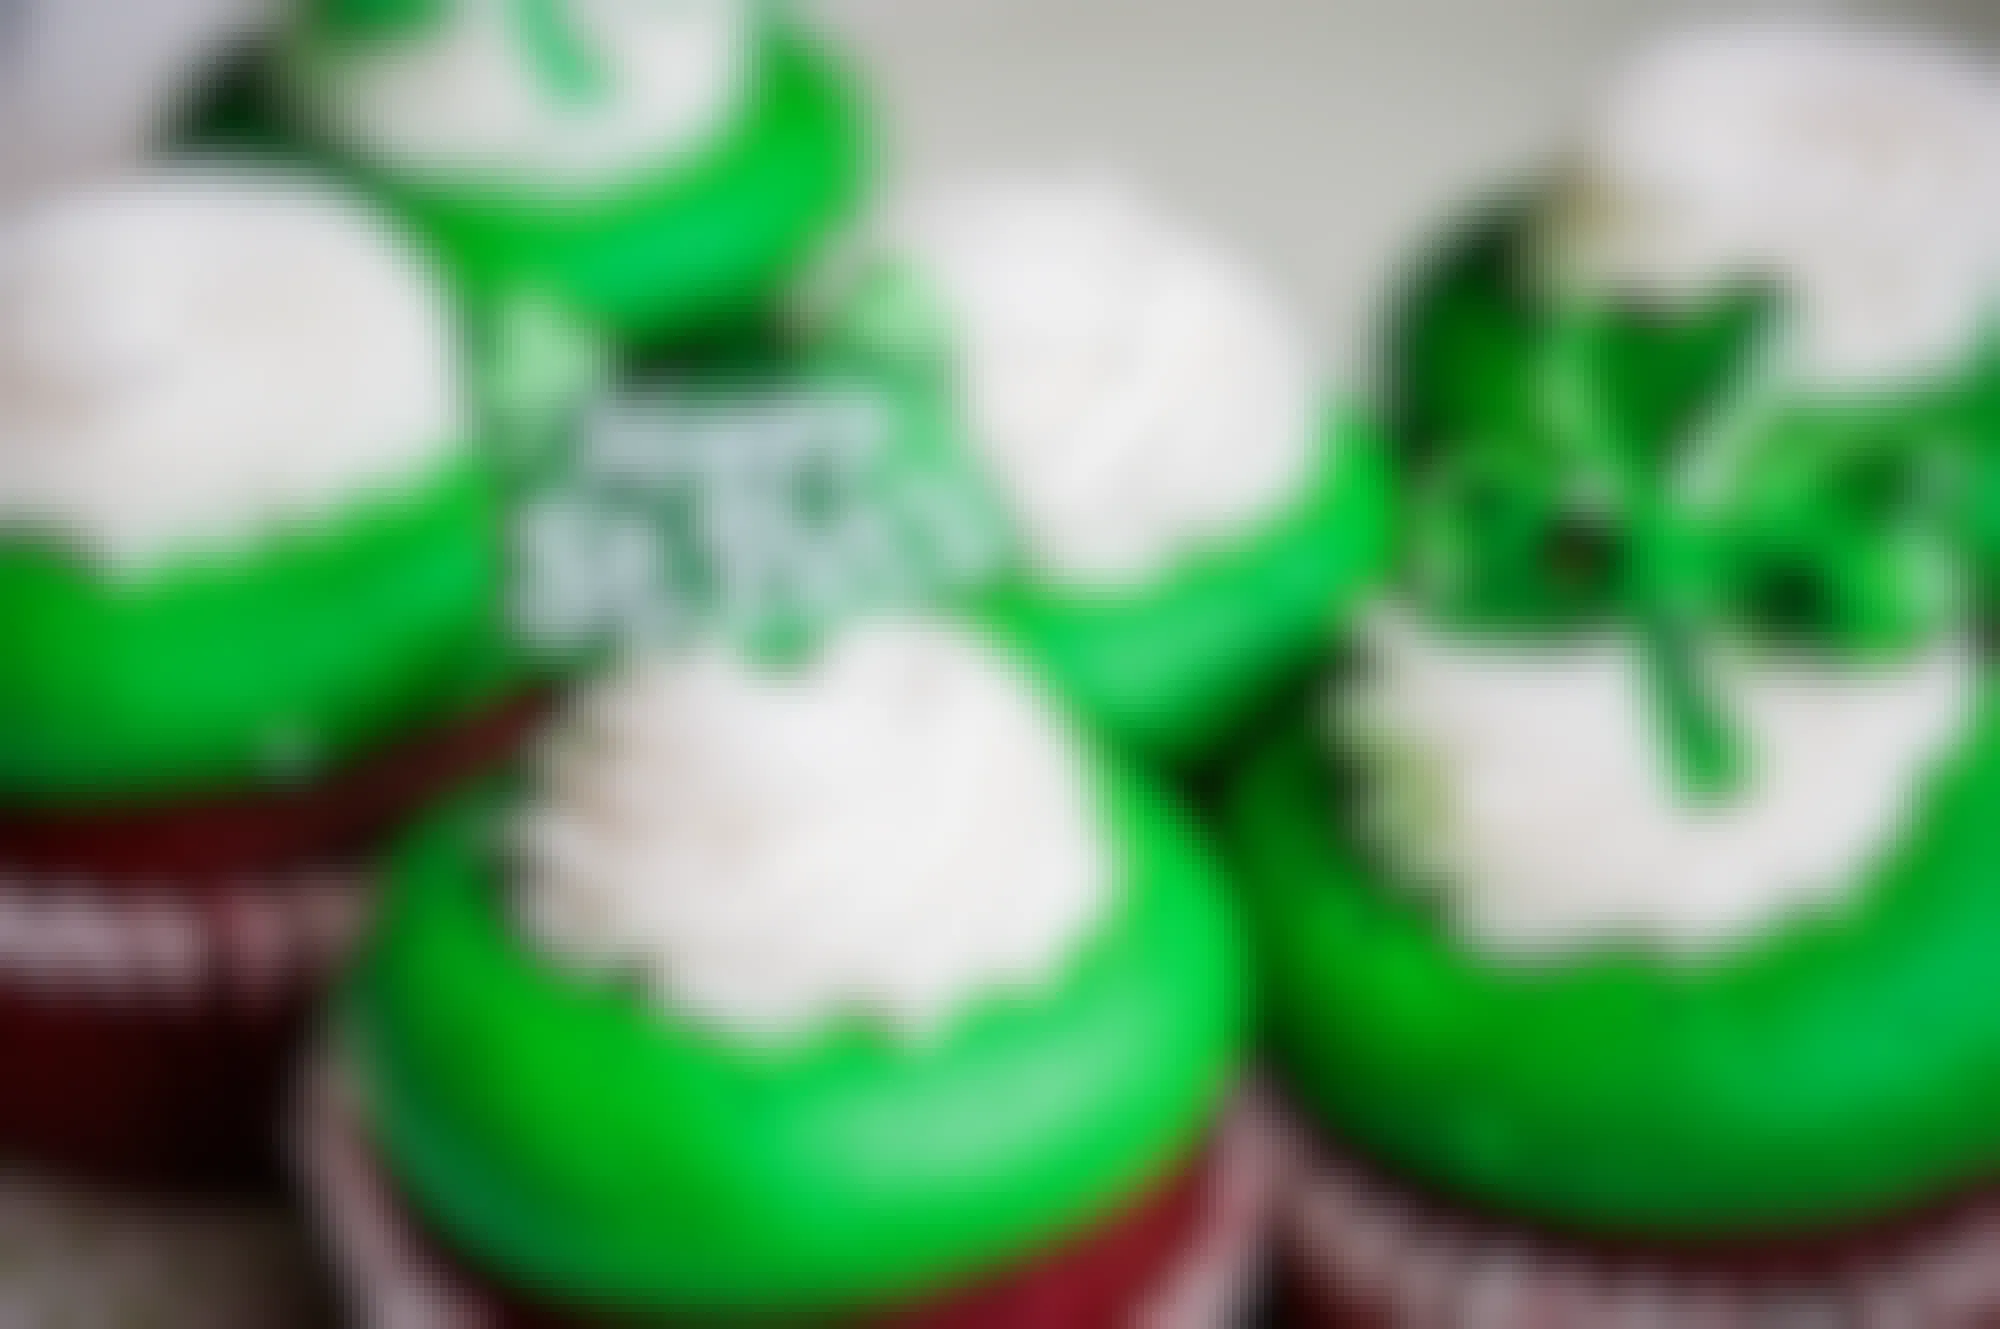 Cupcakes with green frosting and St Patricks day decorations